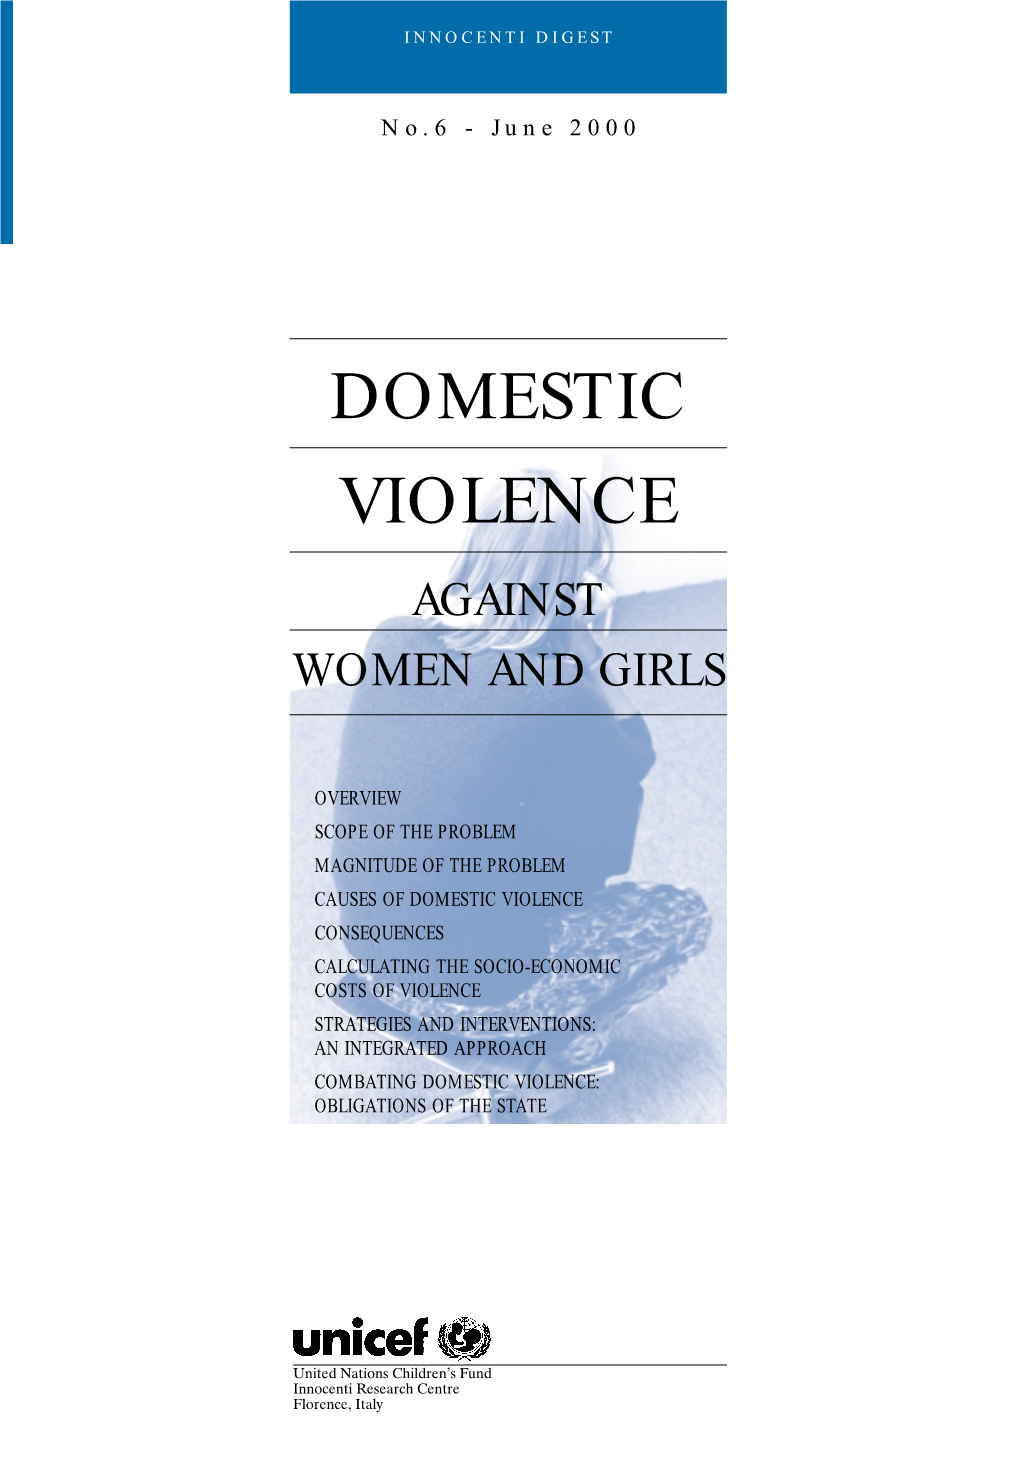 Domestic Violence Against Women and Girls